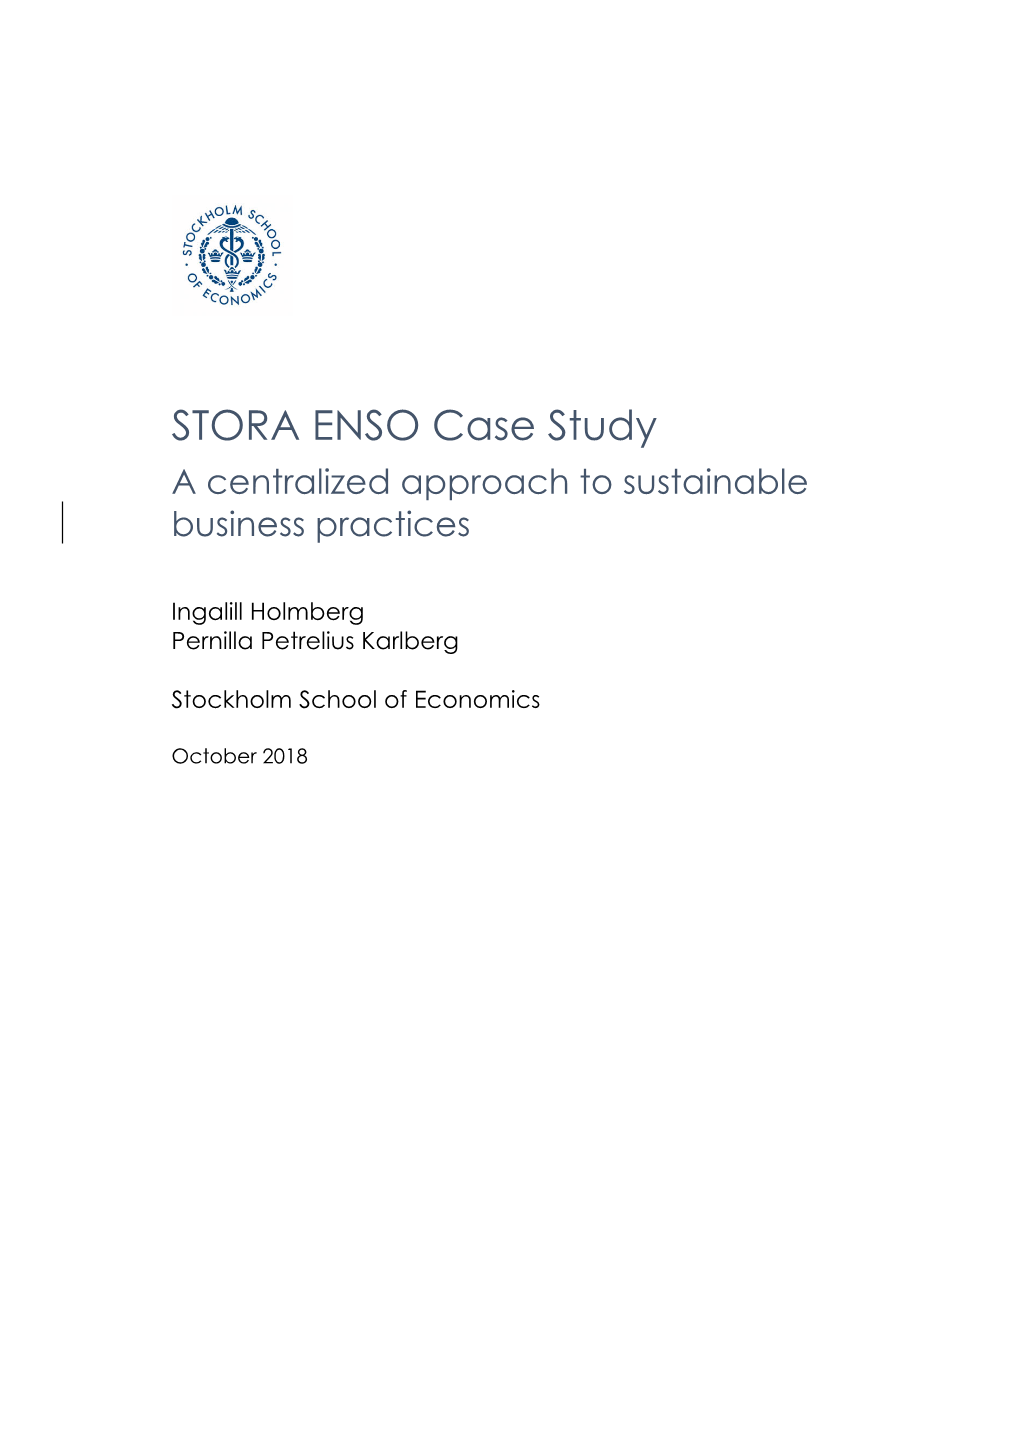 STORA ENSO Case Study a Centralized Approach to Sustainable Business Practices